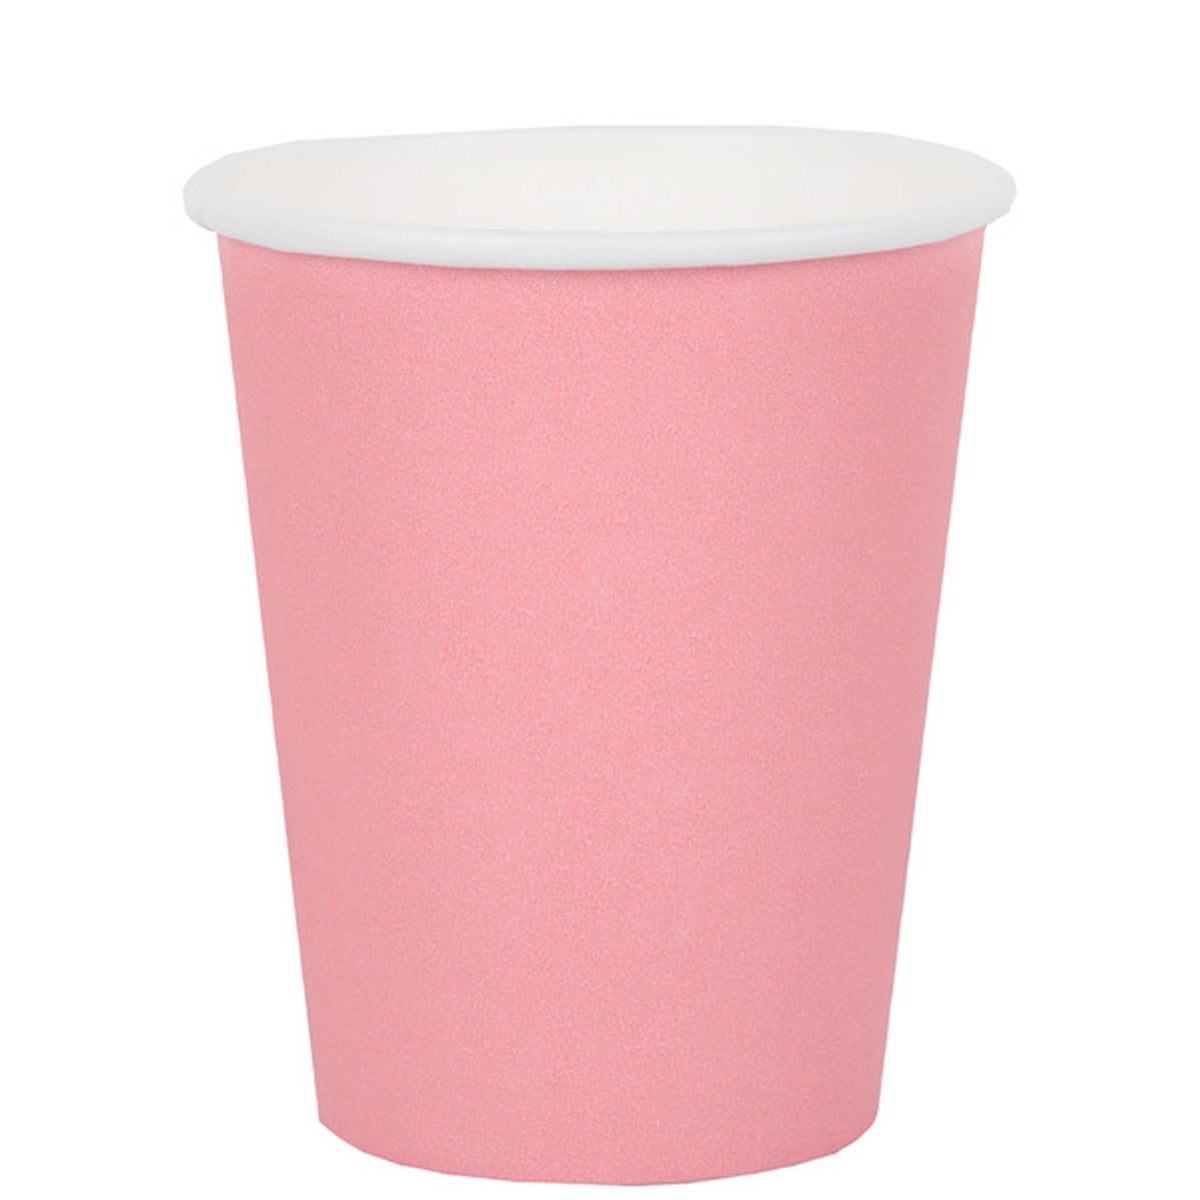 SANTEX Everyday Entertaining Pink Party Paper Cups, 9 Oz, 10 Count 3660380072867